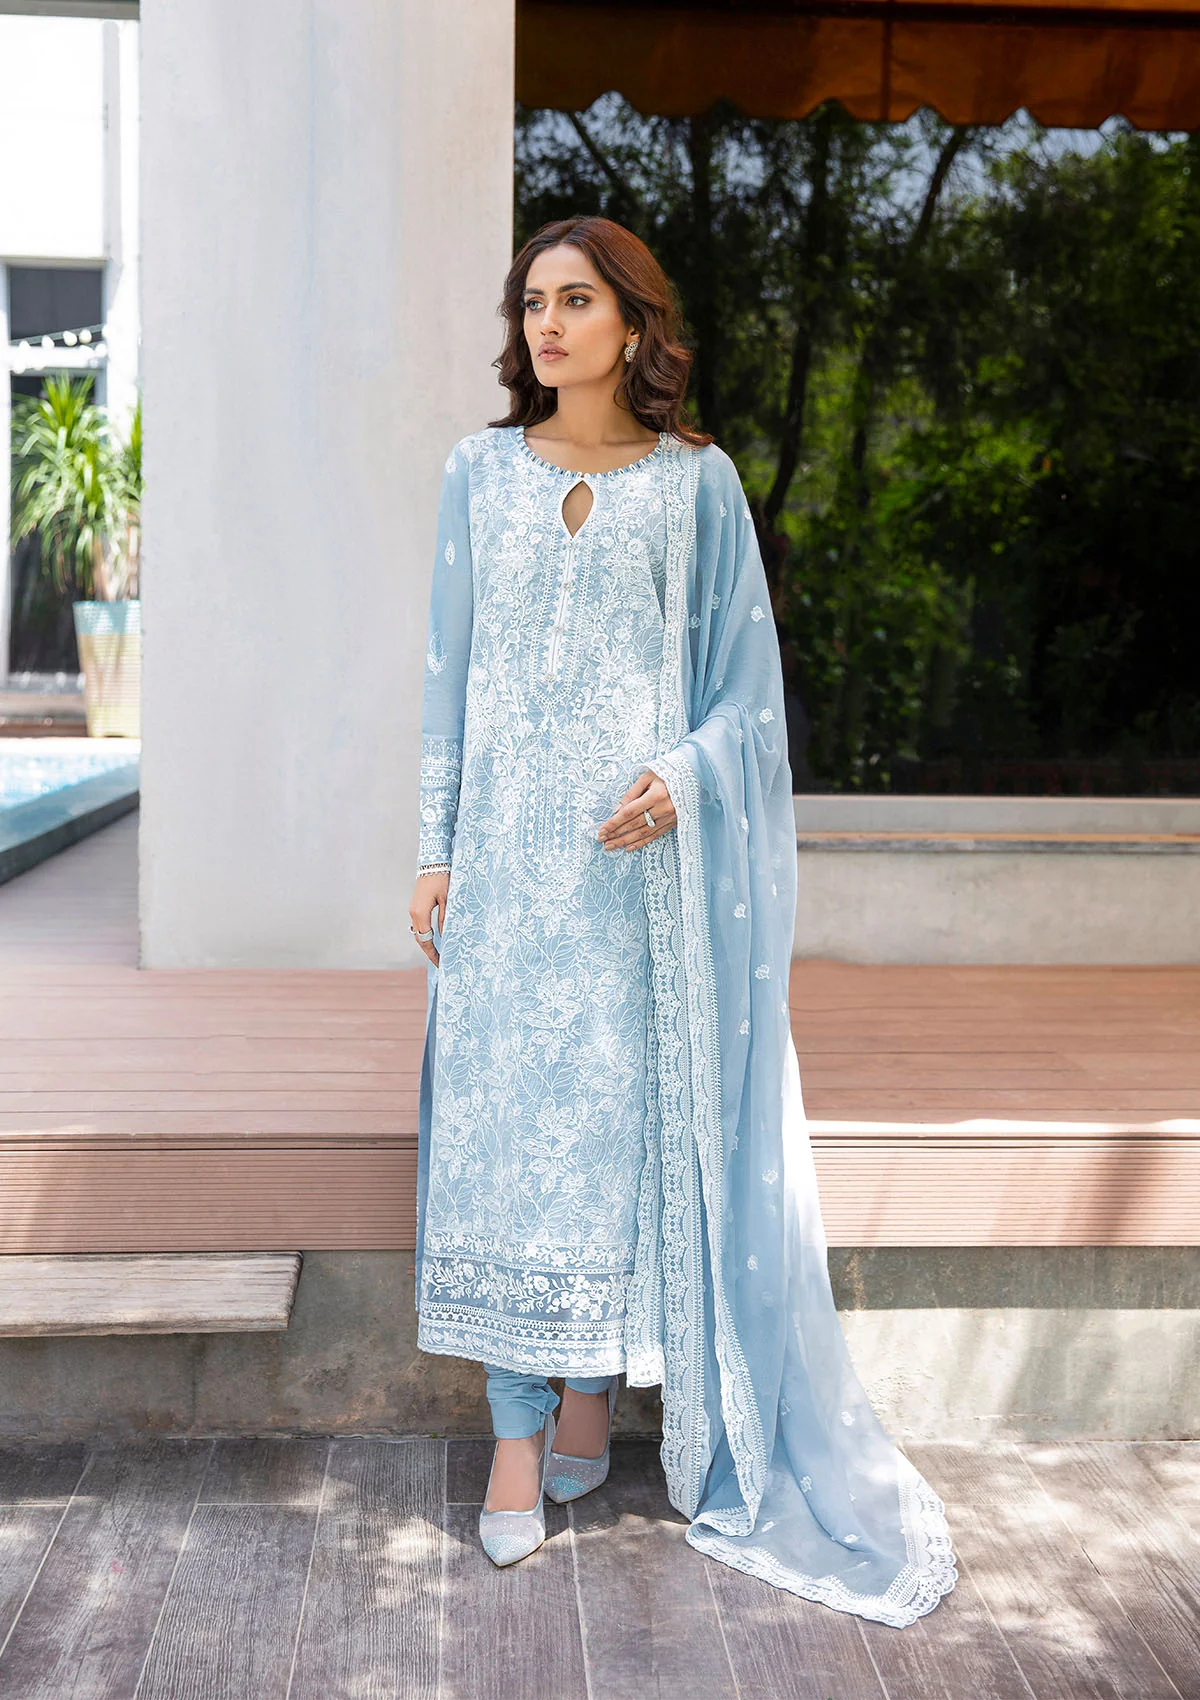 Buy Now, LOOK 2A - AIK Lawn'23 - Vol. 2 - Shahana Collection UK - Wedding and Bridal Party Dresses - Aik Atelier 